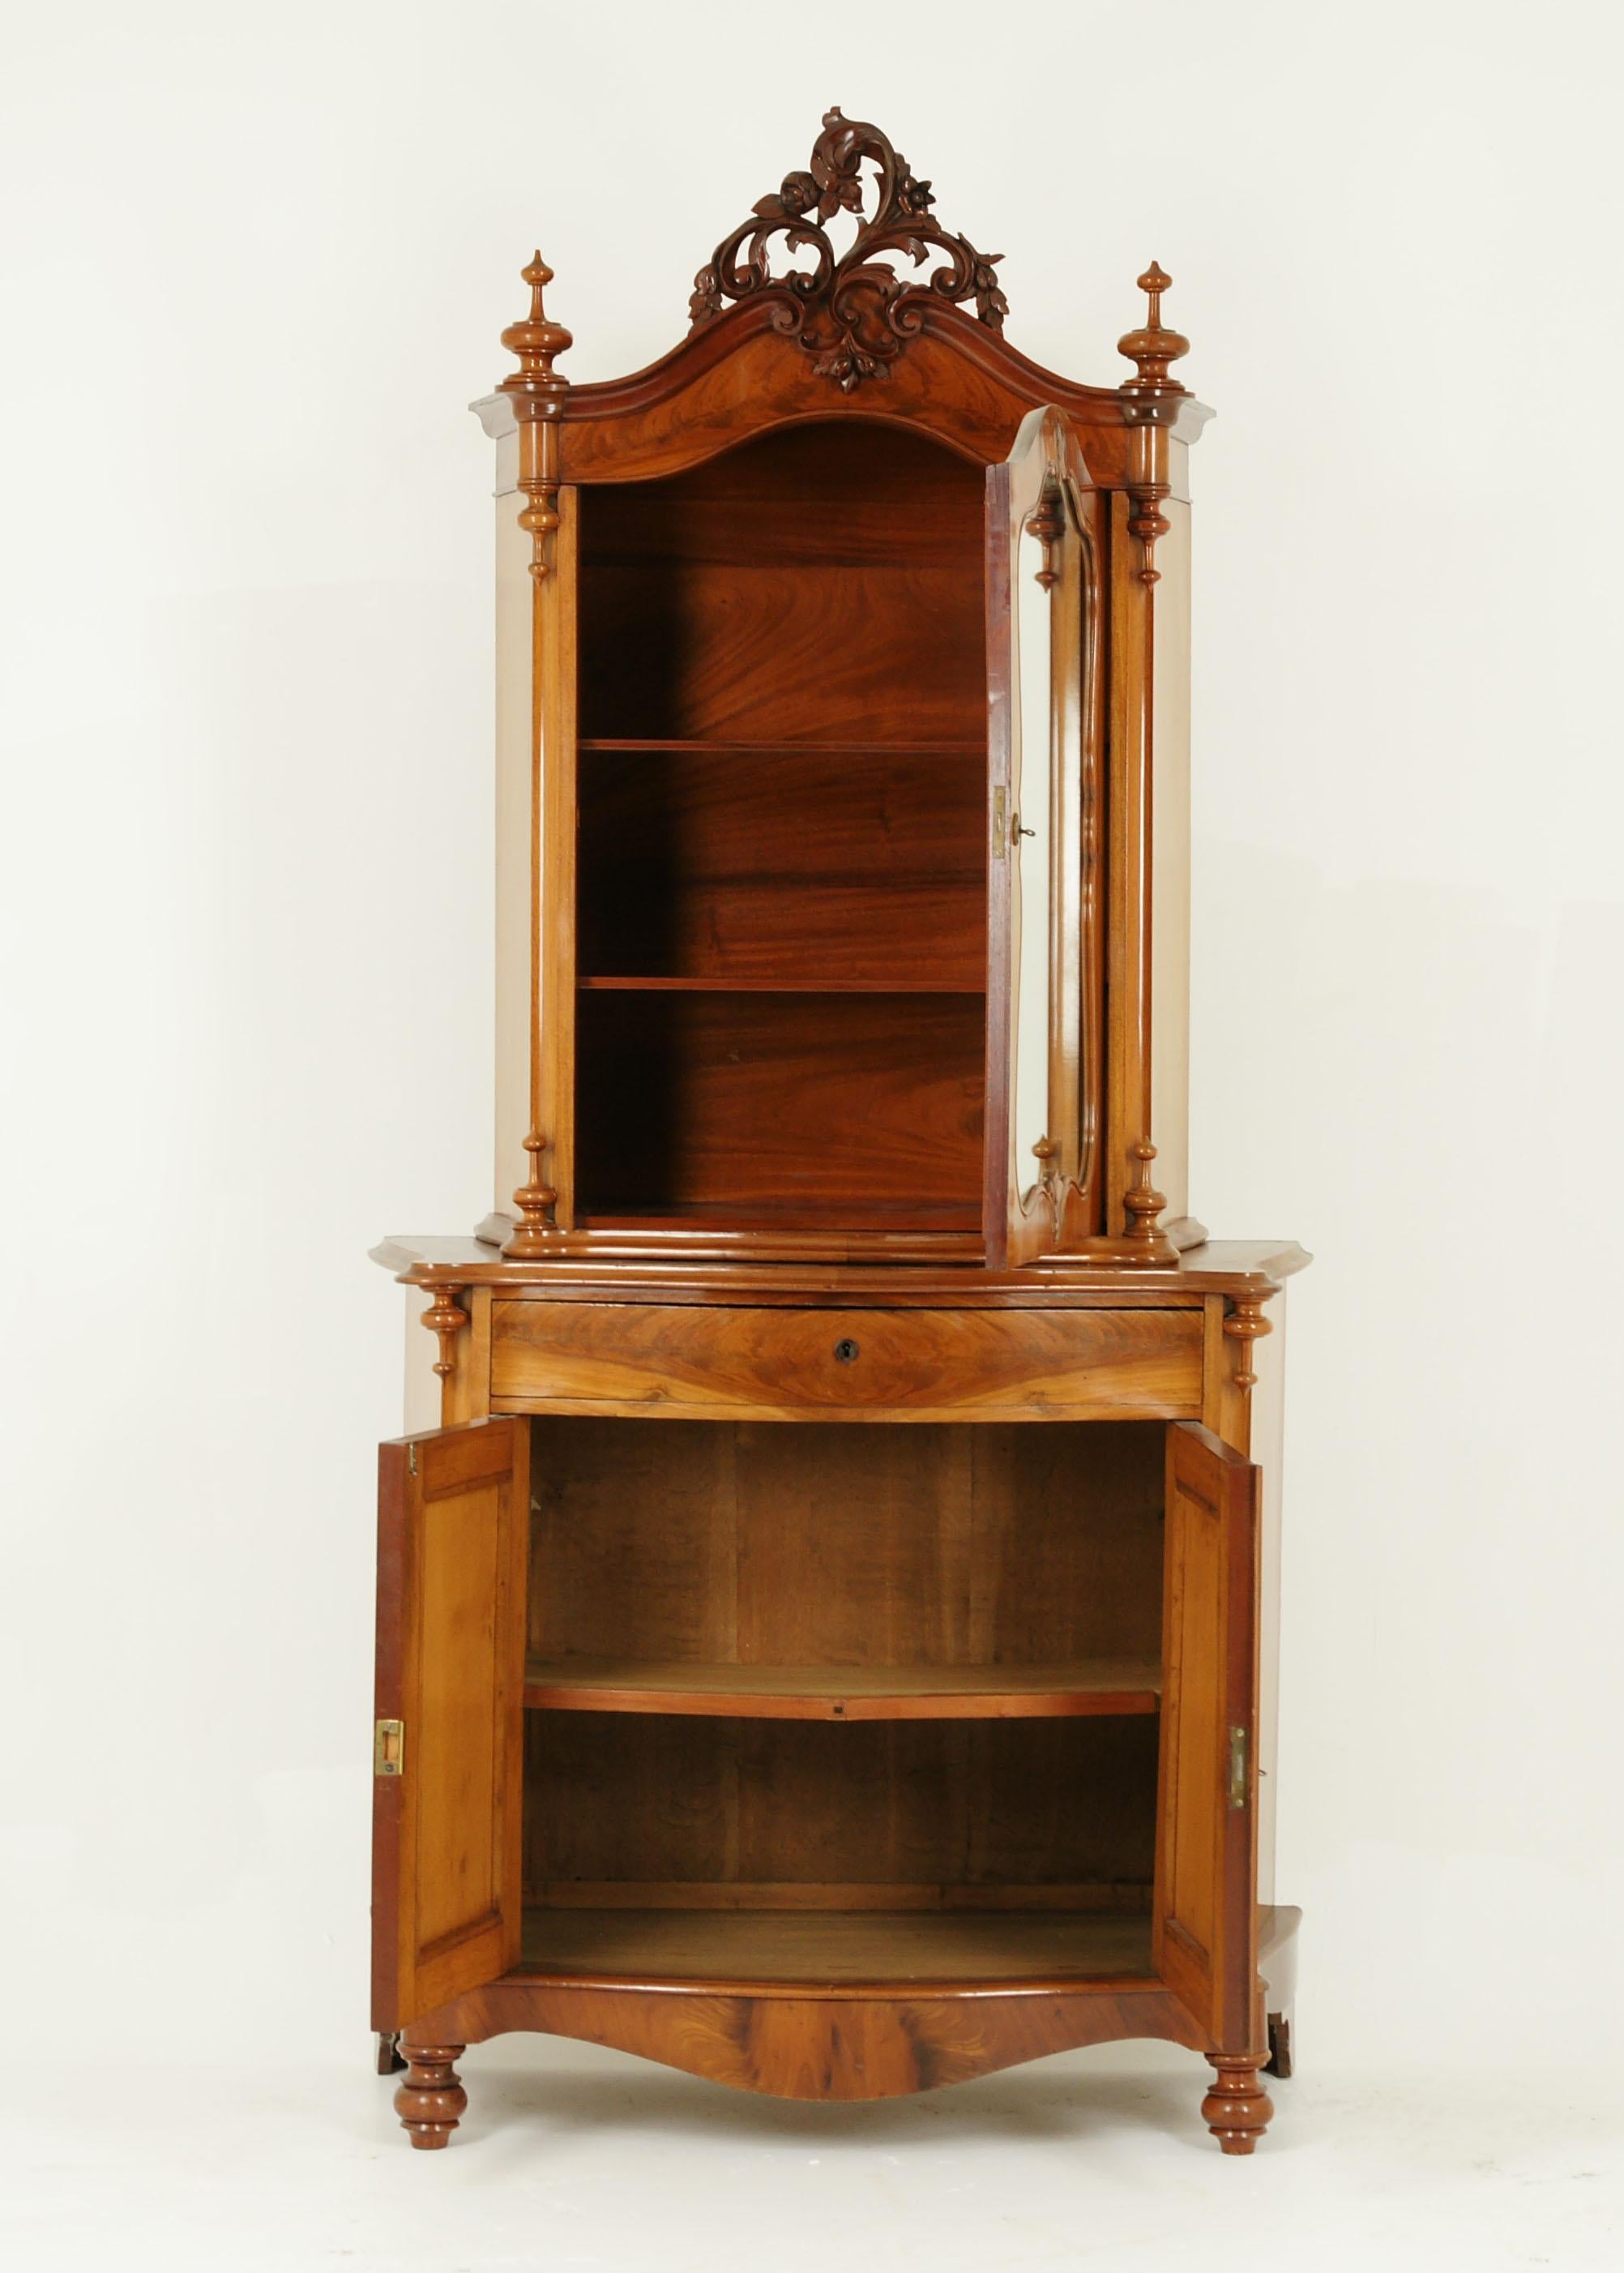 Antique carved vitrine, carved cabinet, walnut, Austria 1880, antique furniture

Austria 1880
Solid walnut with original finish
Carved pierced pediment to the top
Pair finials below
Elaborate shaped mirror door
Opens to reveal pair of solid